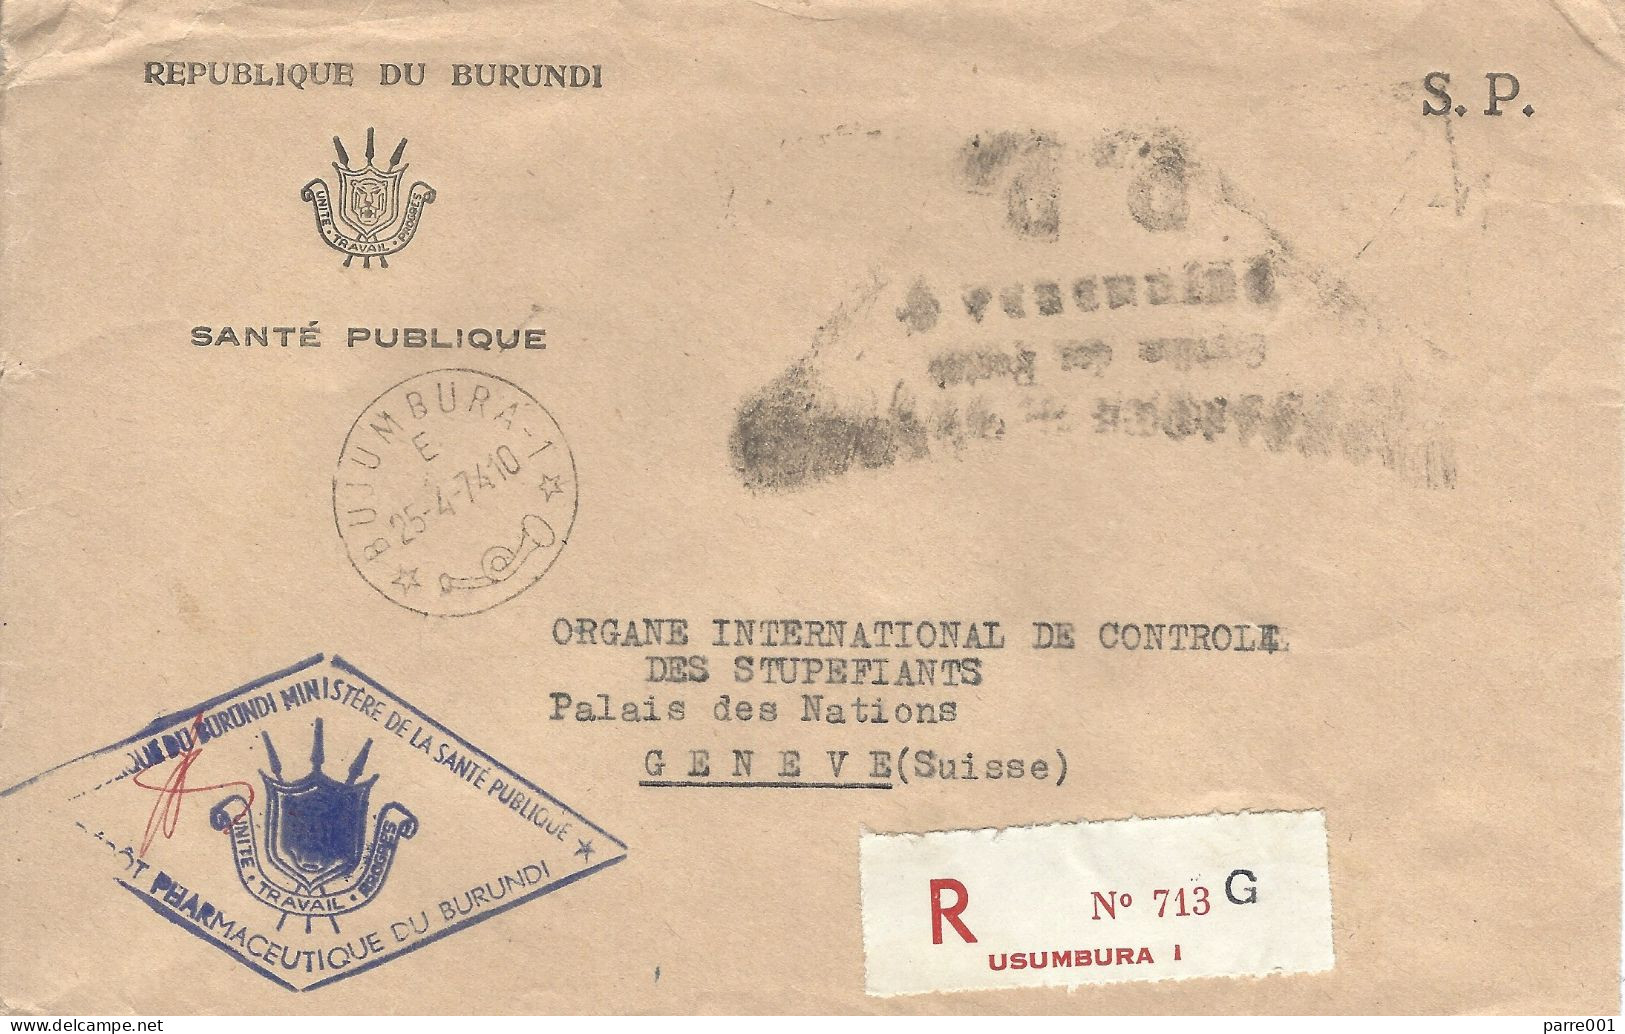 Burundi 1974 Bujumbura Ministry Of Health Official Postage Paid Handstamp Registered Cover To United Nations Geneve - Lettres & Documents